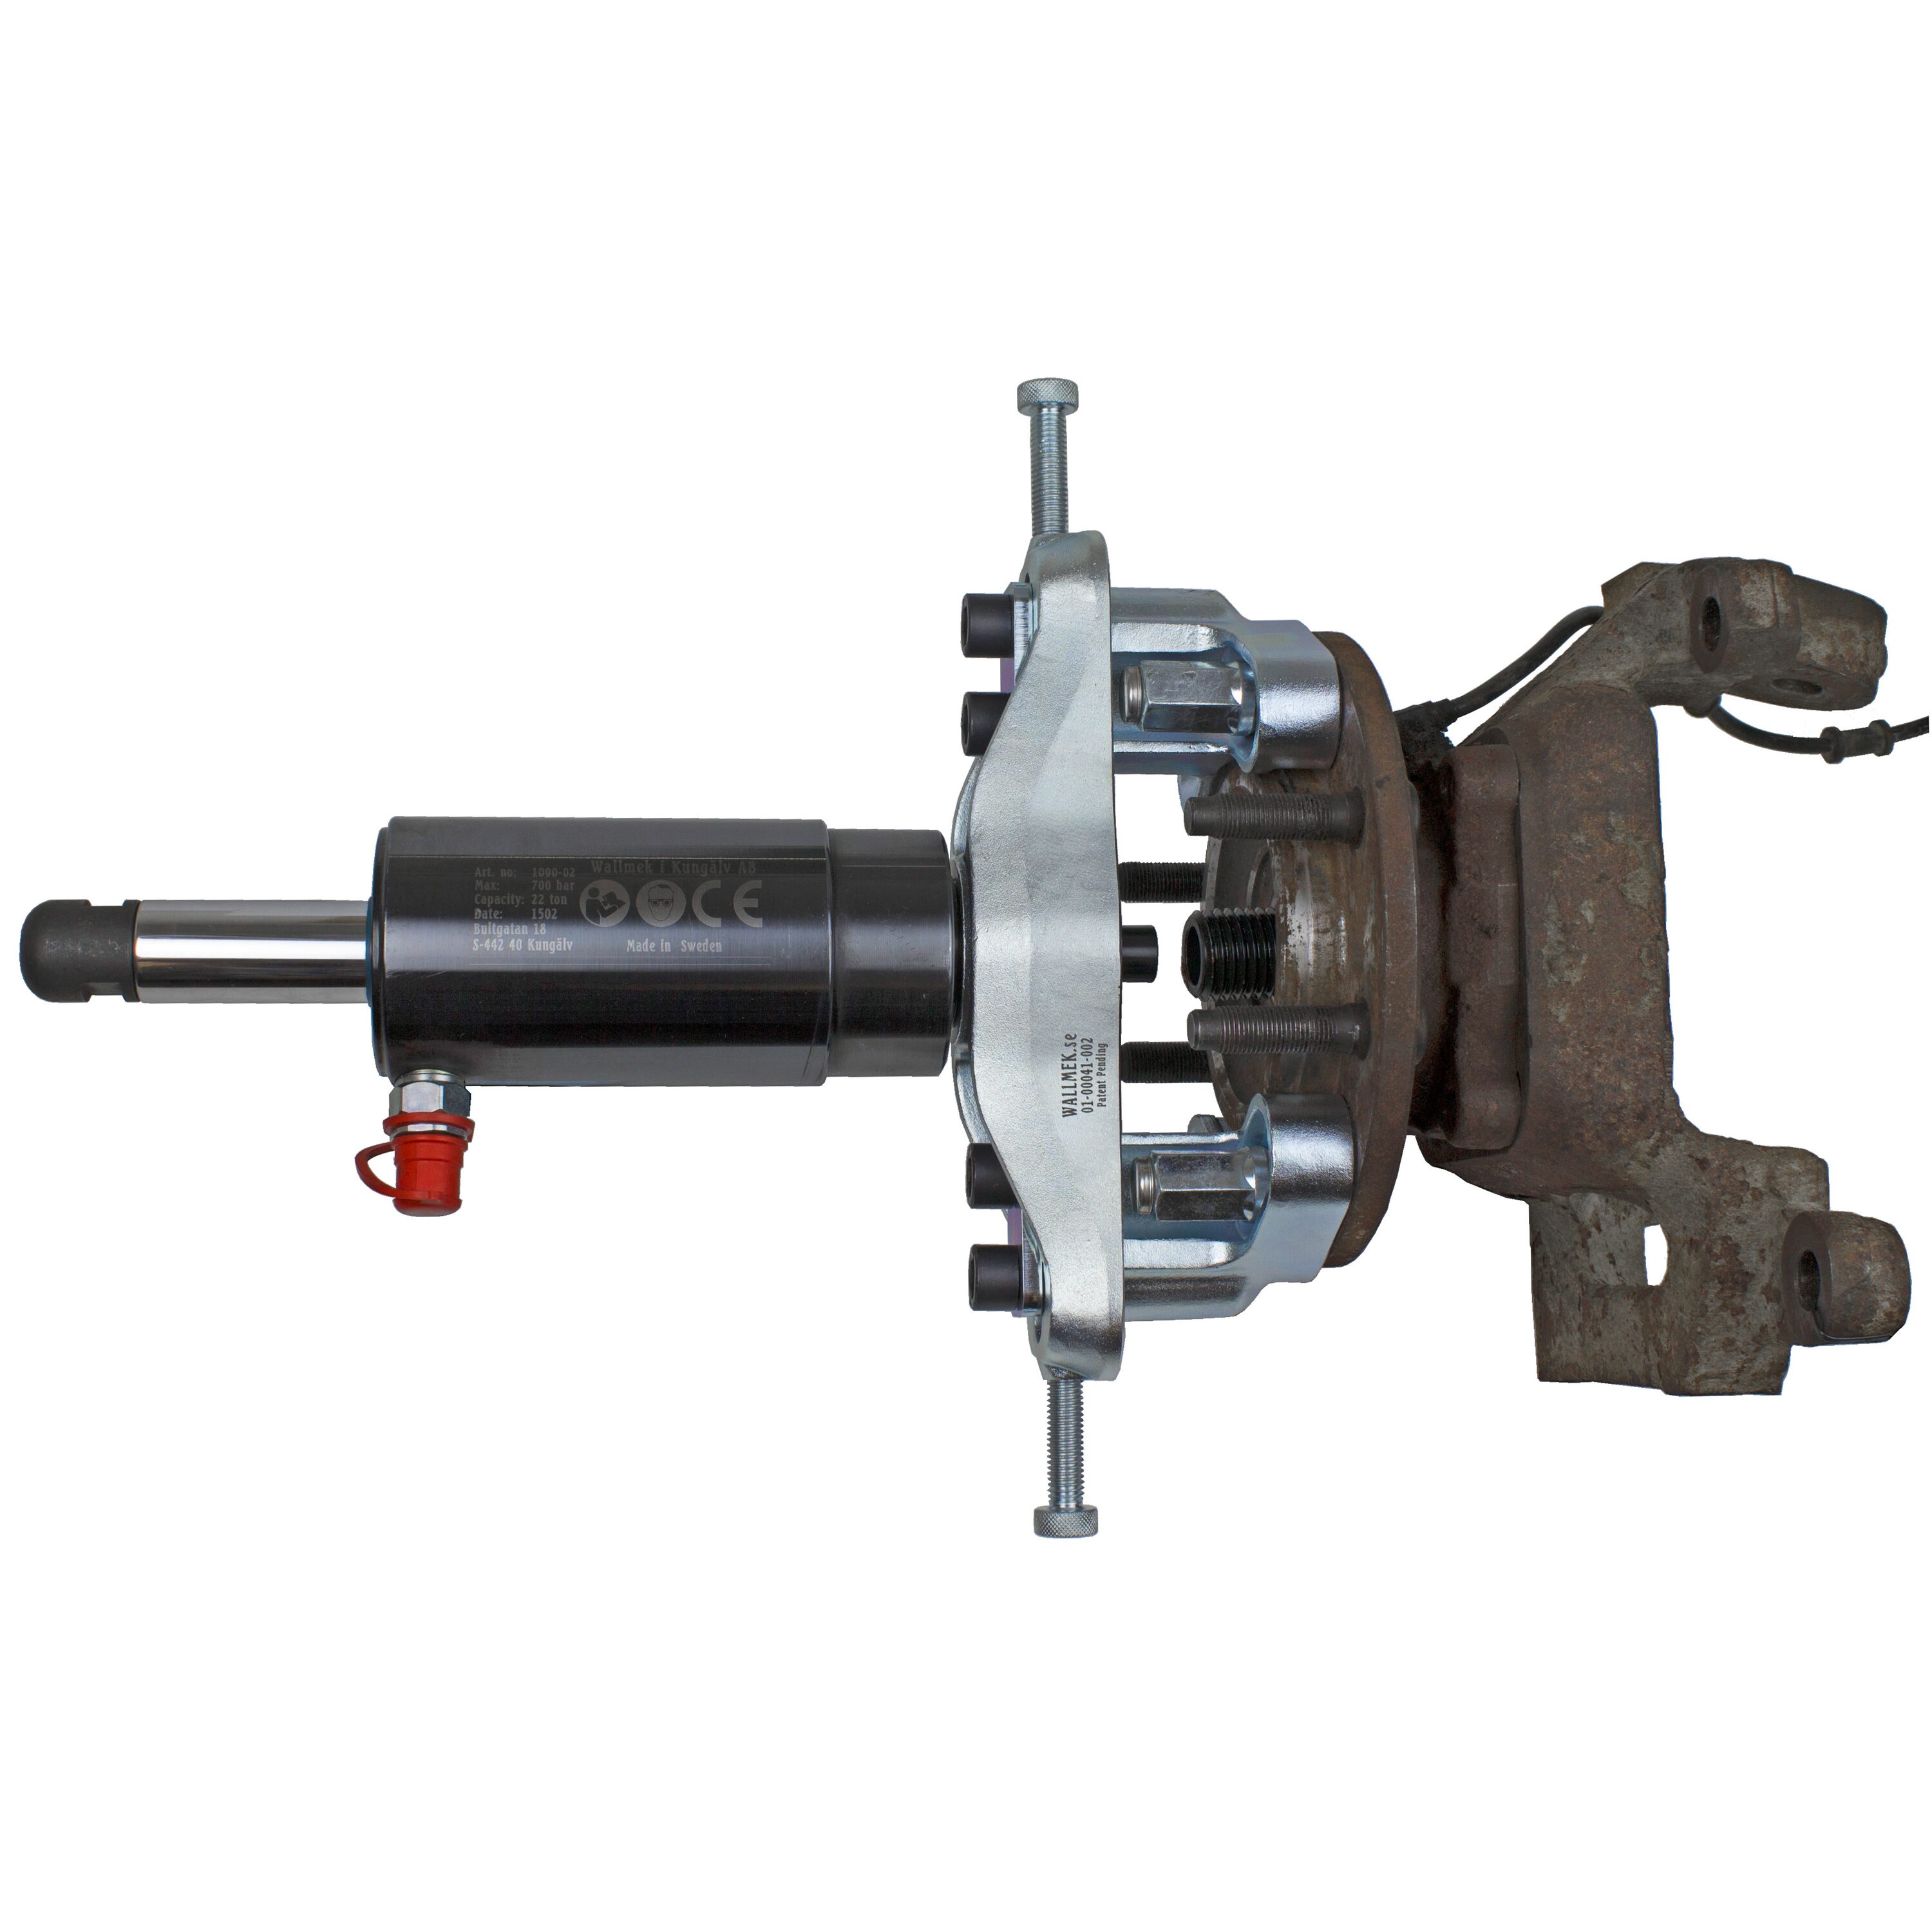 Device for the removal of drive shafts ∙ 6 and 8 holes, Radnabe- /  Antriebswellen Werkzeug, Drive shaft tool sets, Motor/commercial vehicle  specialty tools, product worlds